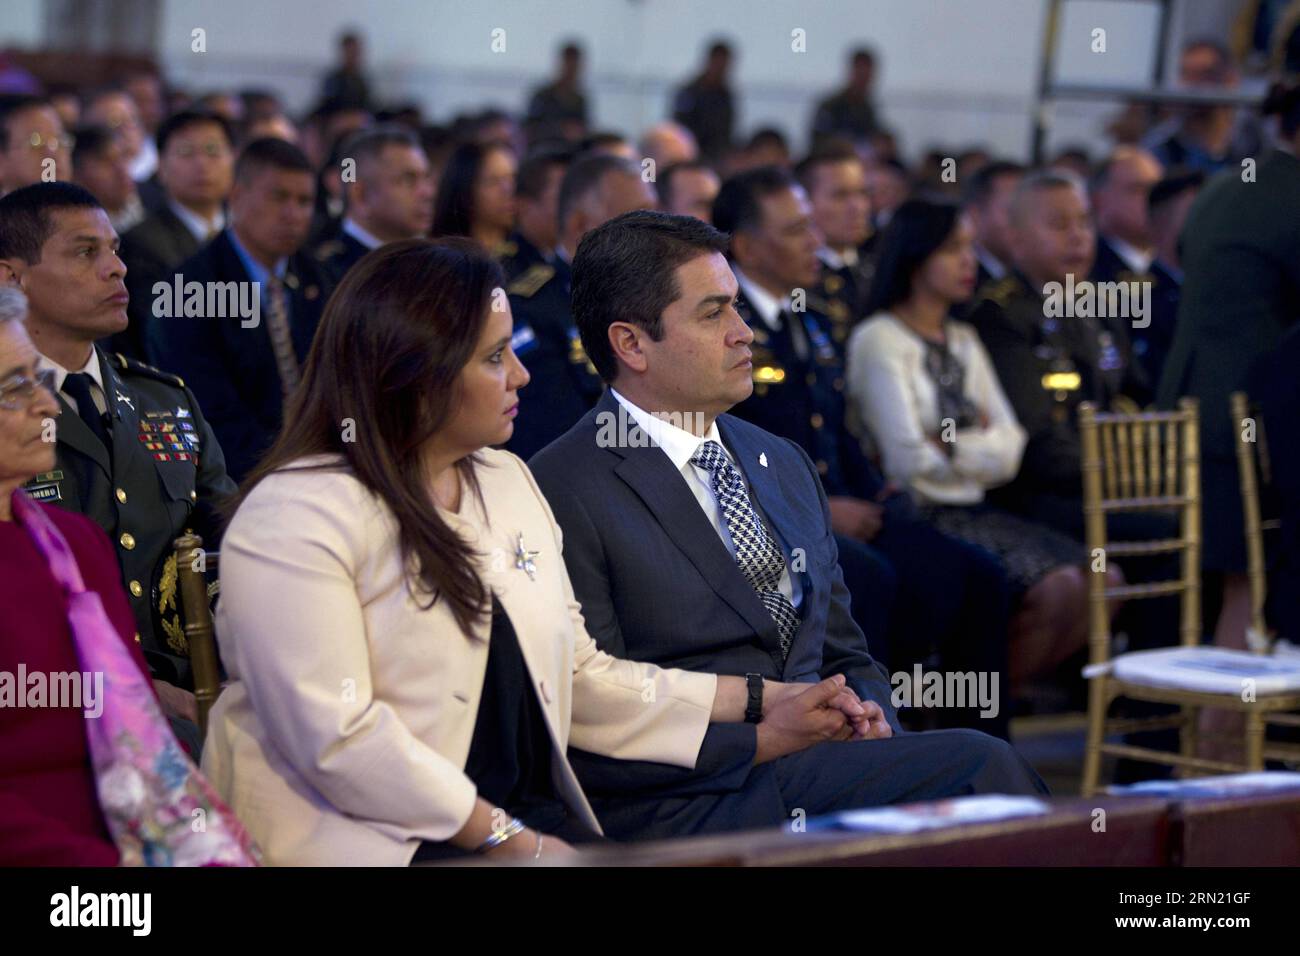 (150130) -- TEGUCIGALPA, Jan. 30, 2015 -- Honduras President Juan Orlando Hernandez (R, front) and his wife Ana Garcia de Hernandez (L, front) attend a religious service commemorating the 268th anniversary of the discovery of the Virgin of Suyapa, which is a six-centimeter tall 18th-century statue of the Virgin Mary, in the Suyapa Basilica, in Tegucigalpa, Honduras, on Jan. 30, 2015. Rafael Ochoa) (da) HONDURAS-TEGUCIGALPA-POLITICS-HERNANDEZ e RAFAELxOCHOA PUBLICATIONxNOTxINxCHN   Tegucigalpa Jan 30 2015 Honduras President Juan Orlando Hernandez r Front and His wife Ana Garcia de Hernandez l F Stock Photo